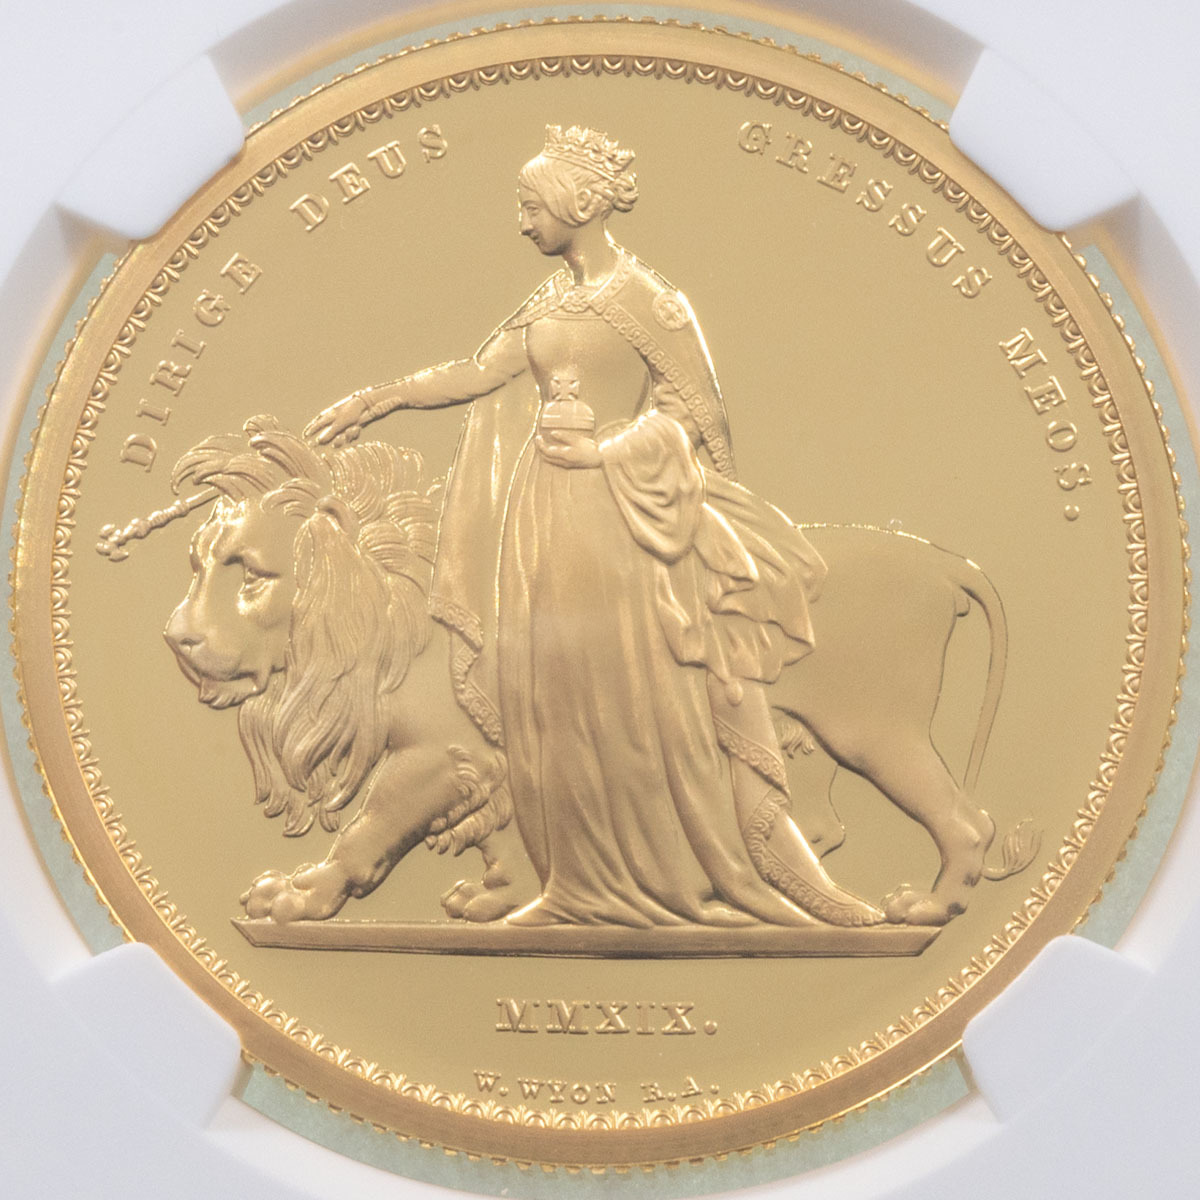 UK19UL2G 2019 Great Engravers Una And The Lion Two Ounce Gold Proof Coin NGC Graded PF 70 Ultra Cameo Reverse